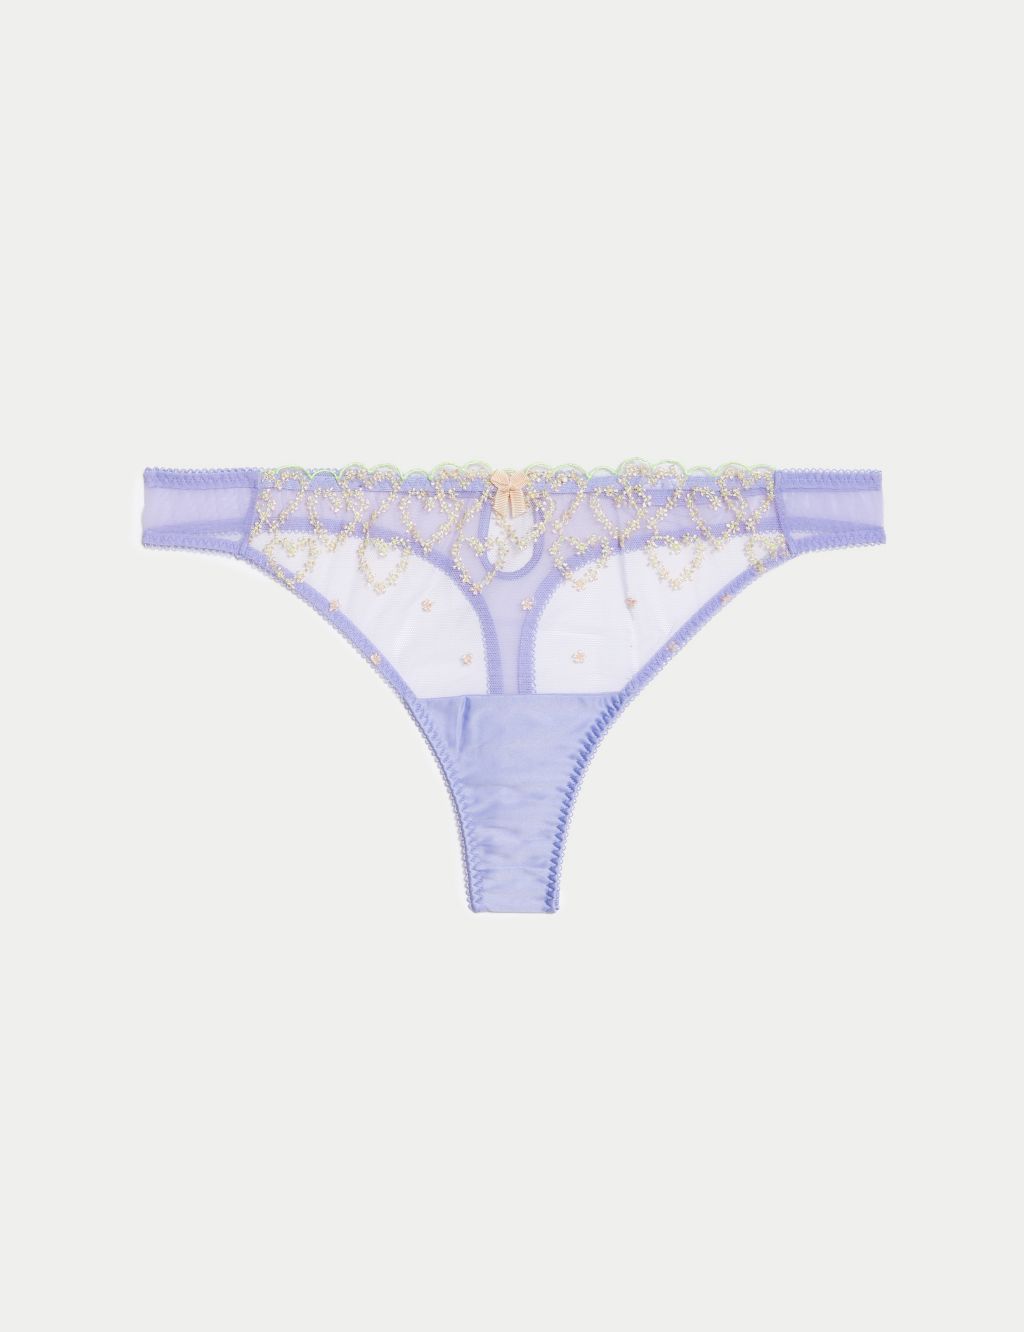 Aletta Embroidery Thong image 2